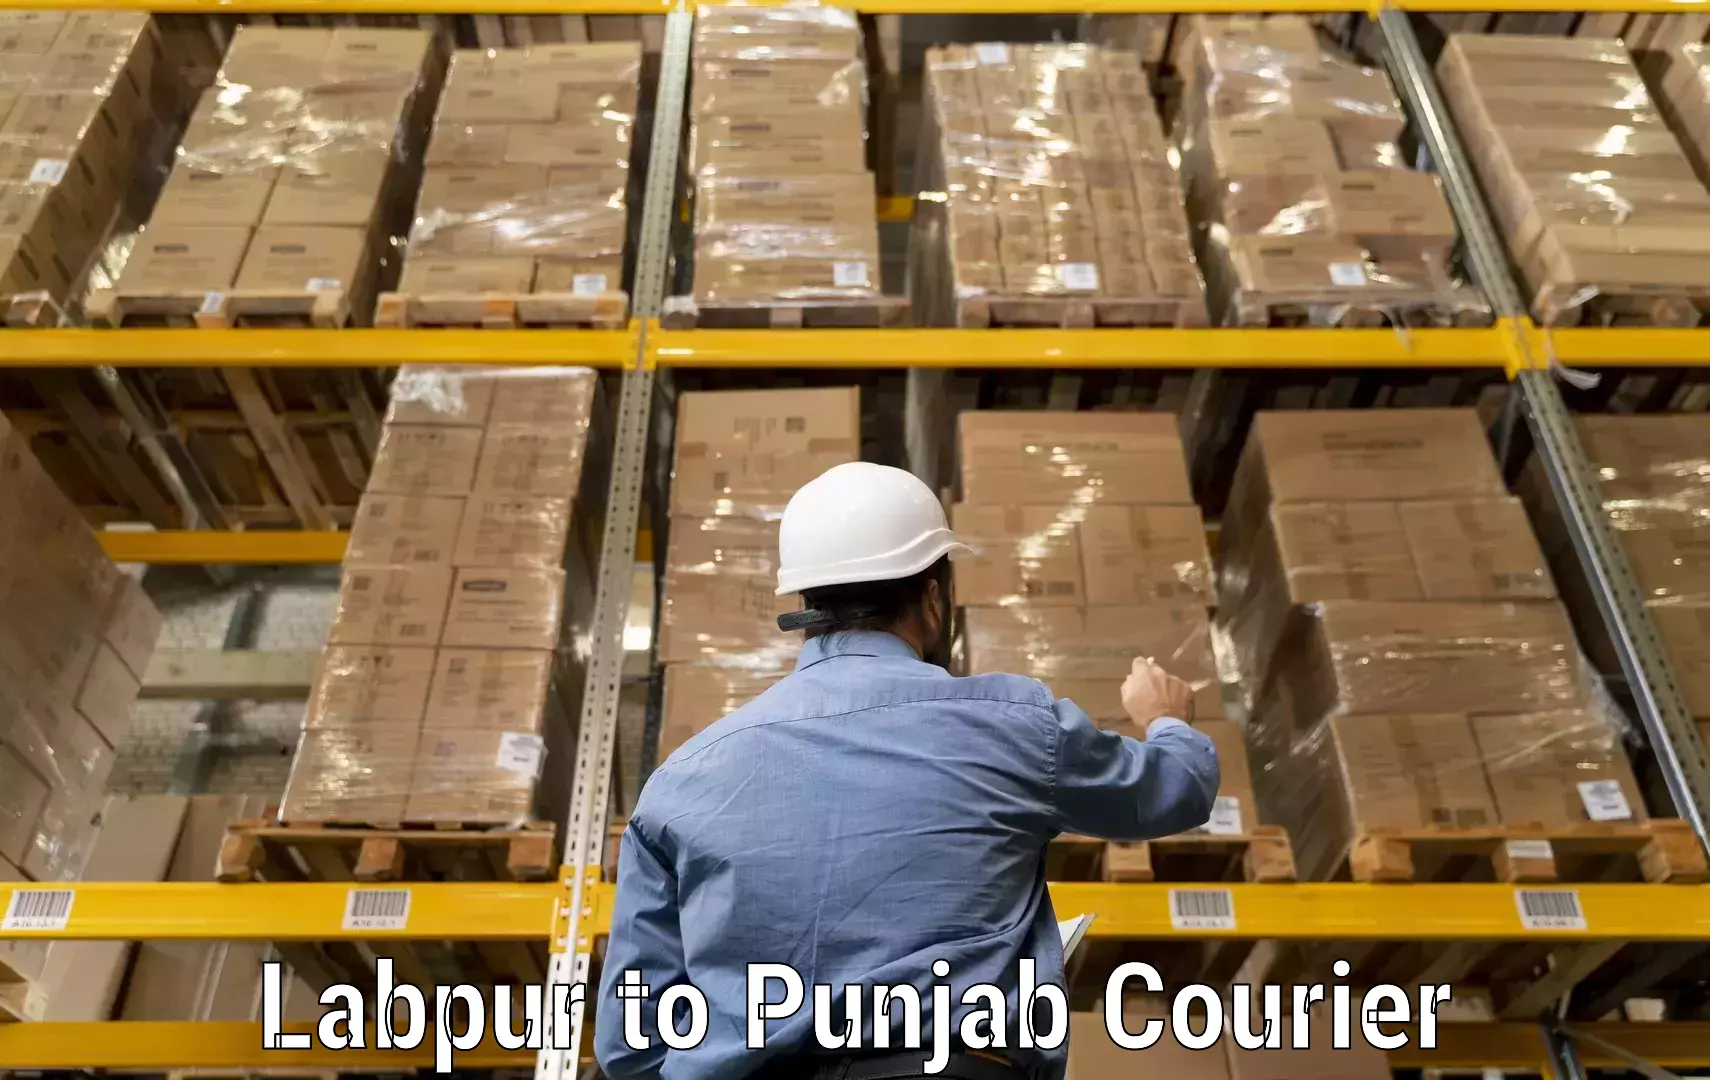 Speedy delivery service Labpur to Patiala